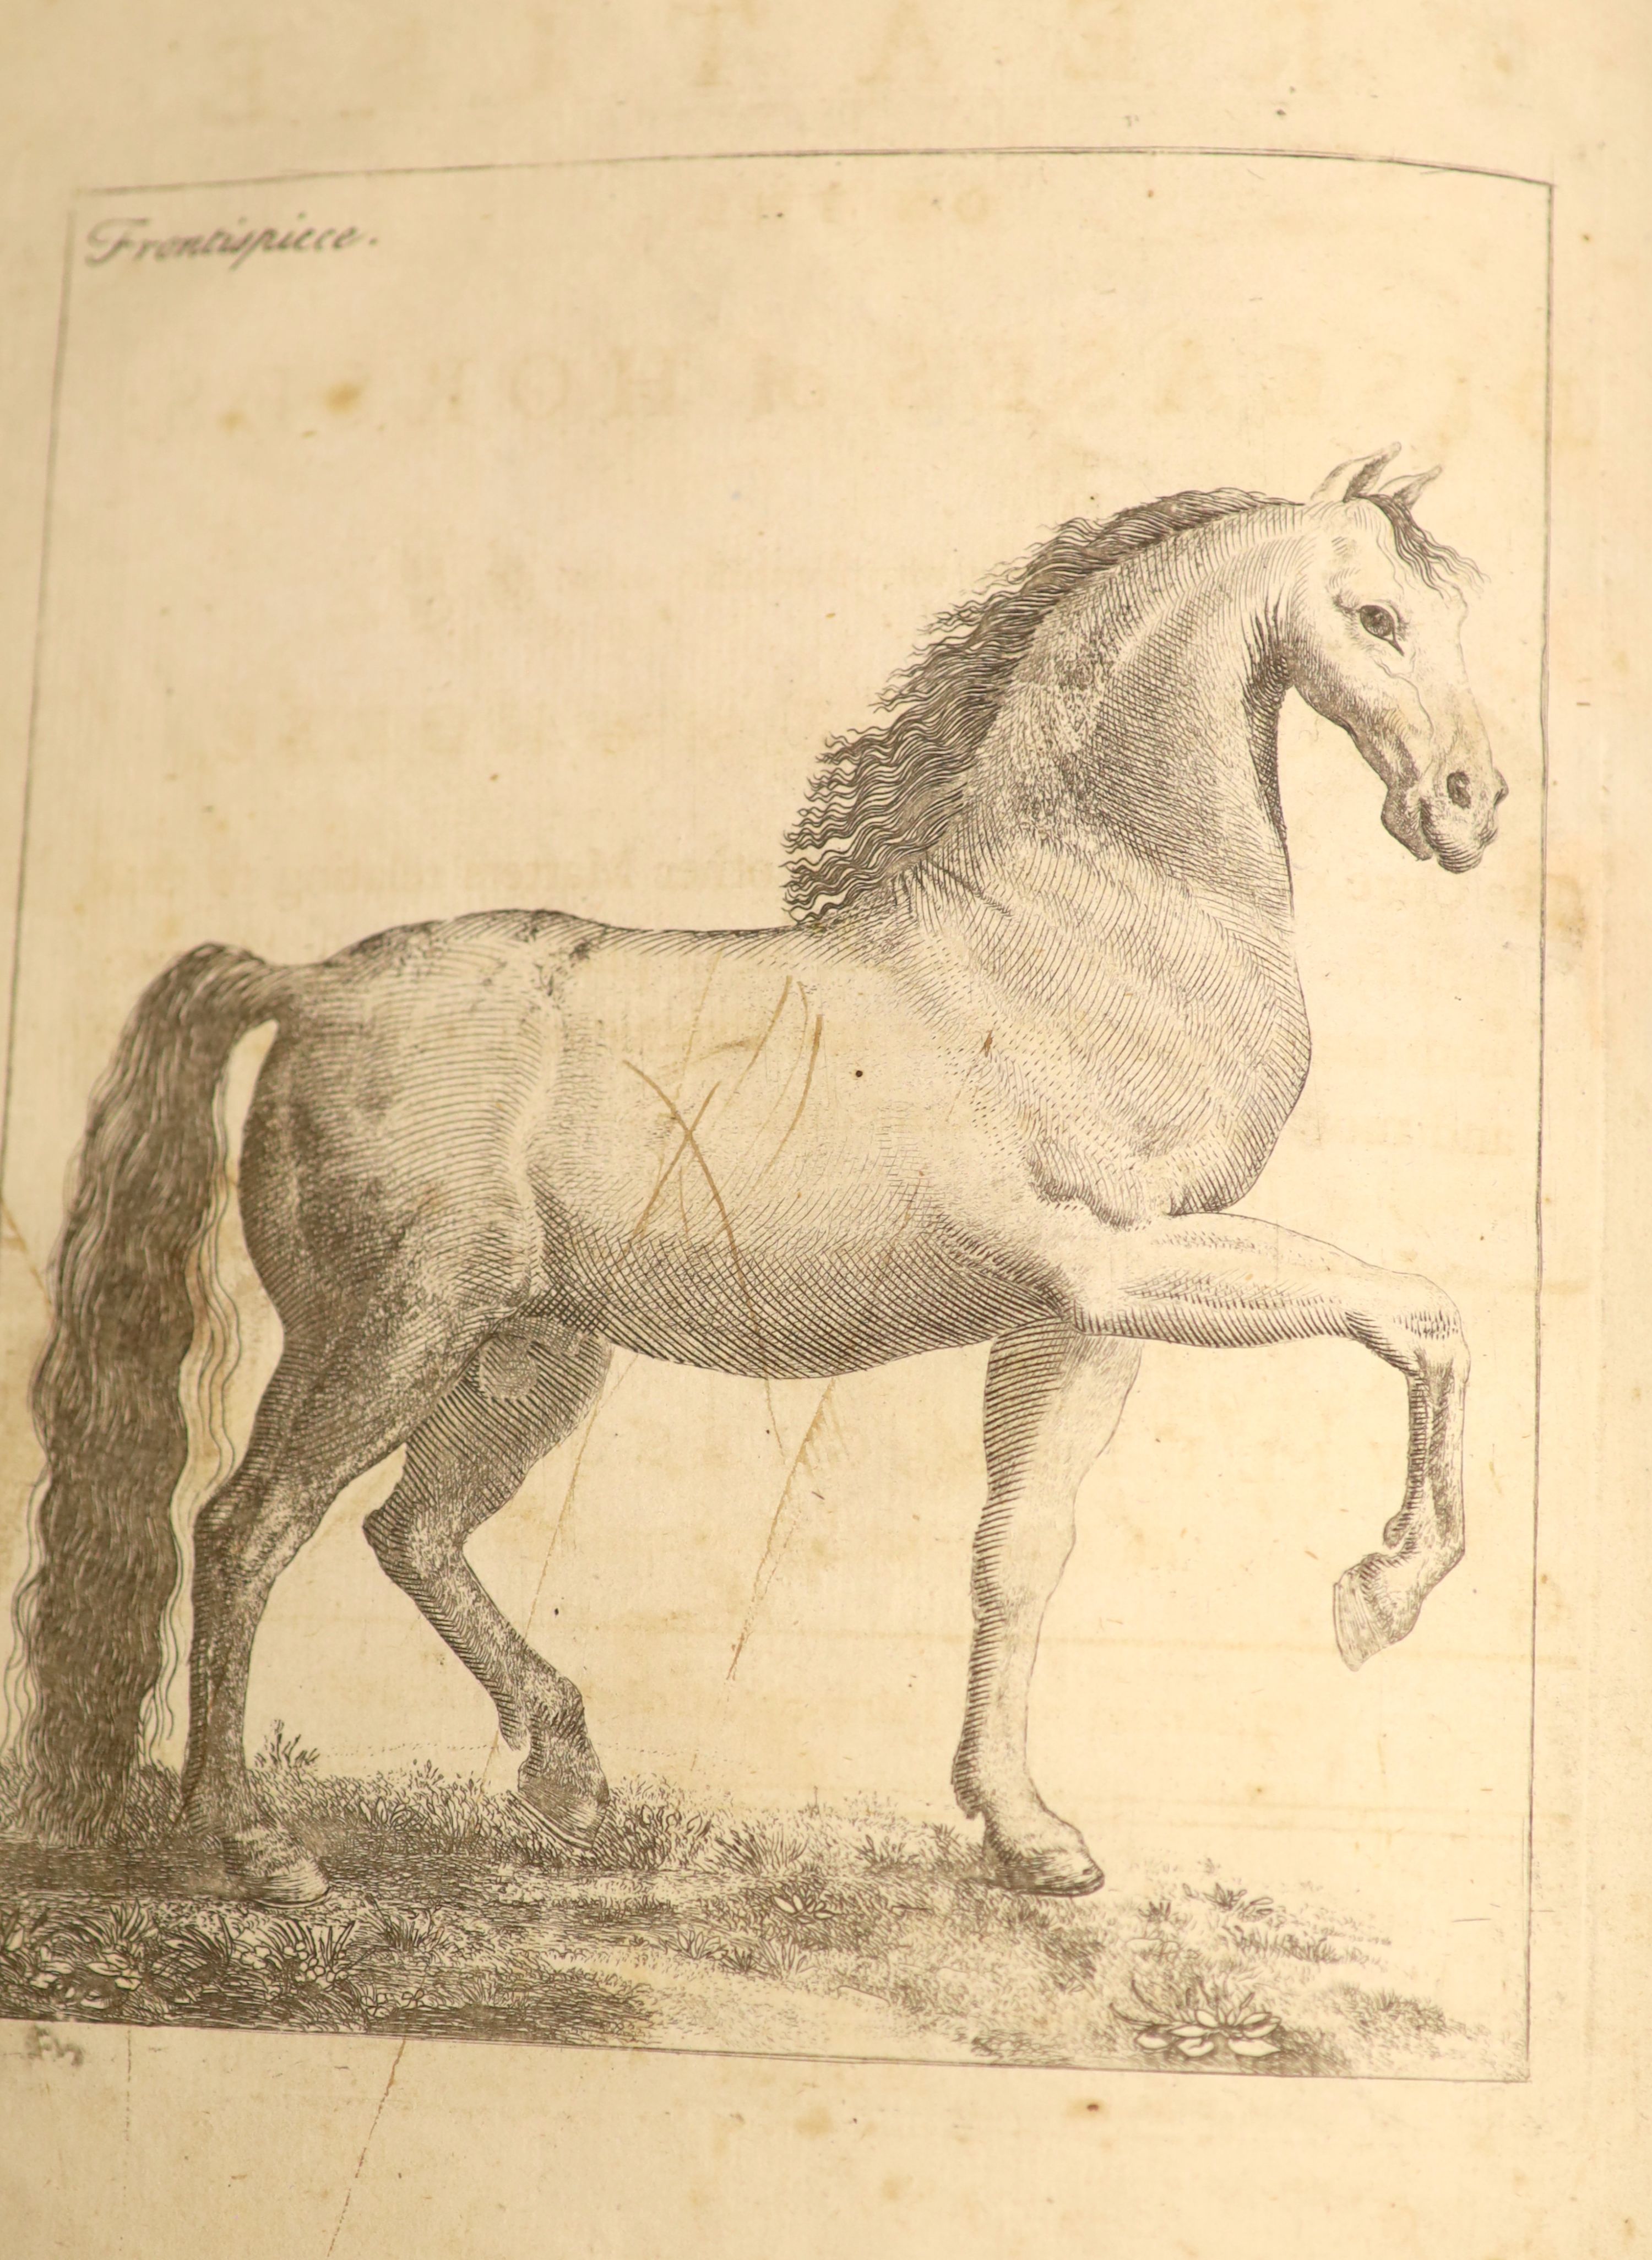 Gibson, William - A New Treatise on the Diseases of Horses, qto, later half morocco, with engraved frontispiece and 31 plates, A. Millar, London, 1751